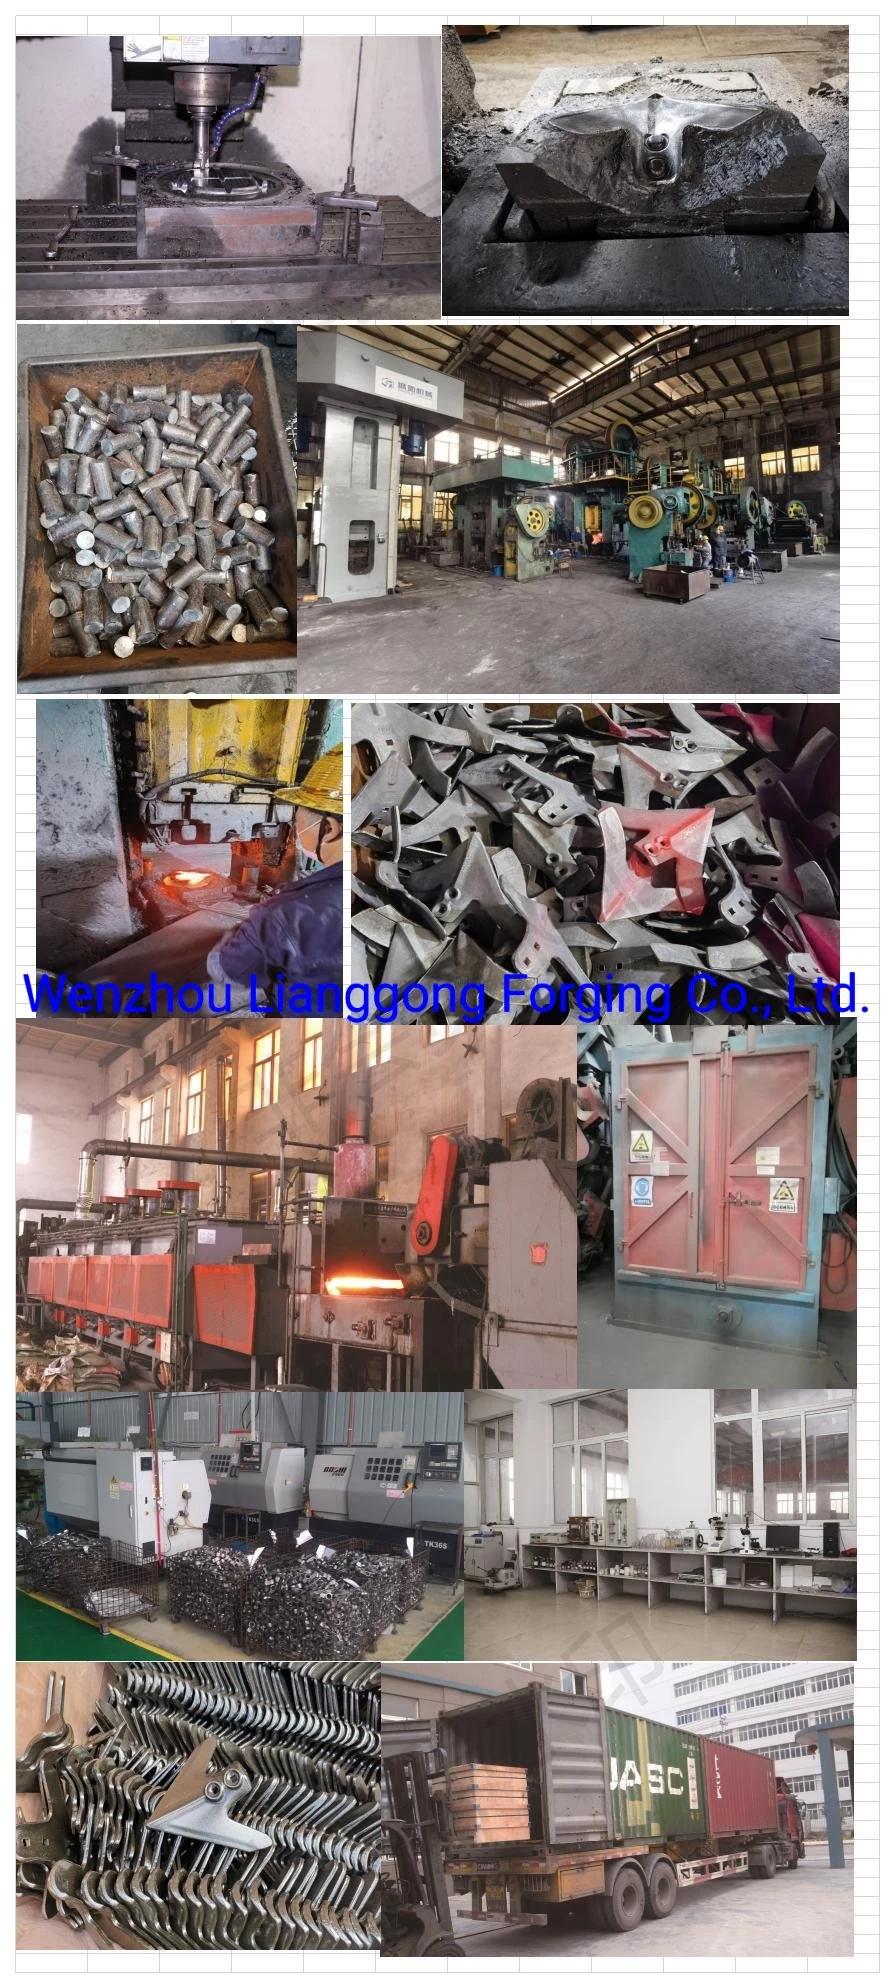 Custom Hot Forgings Used in Construction Machinery/Agricultural Machinery